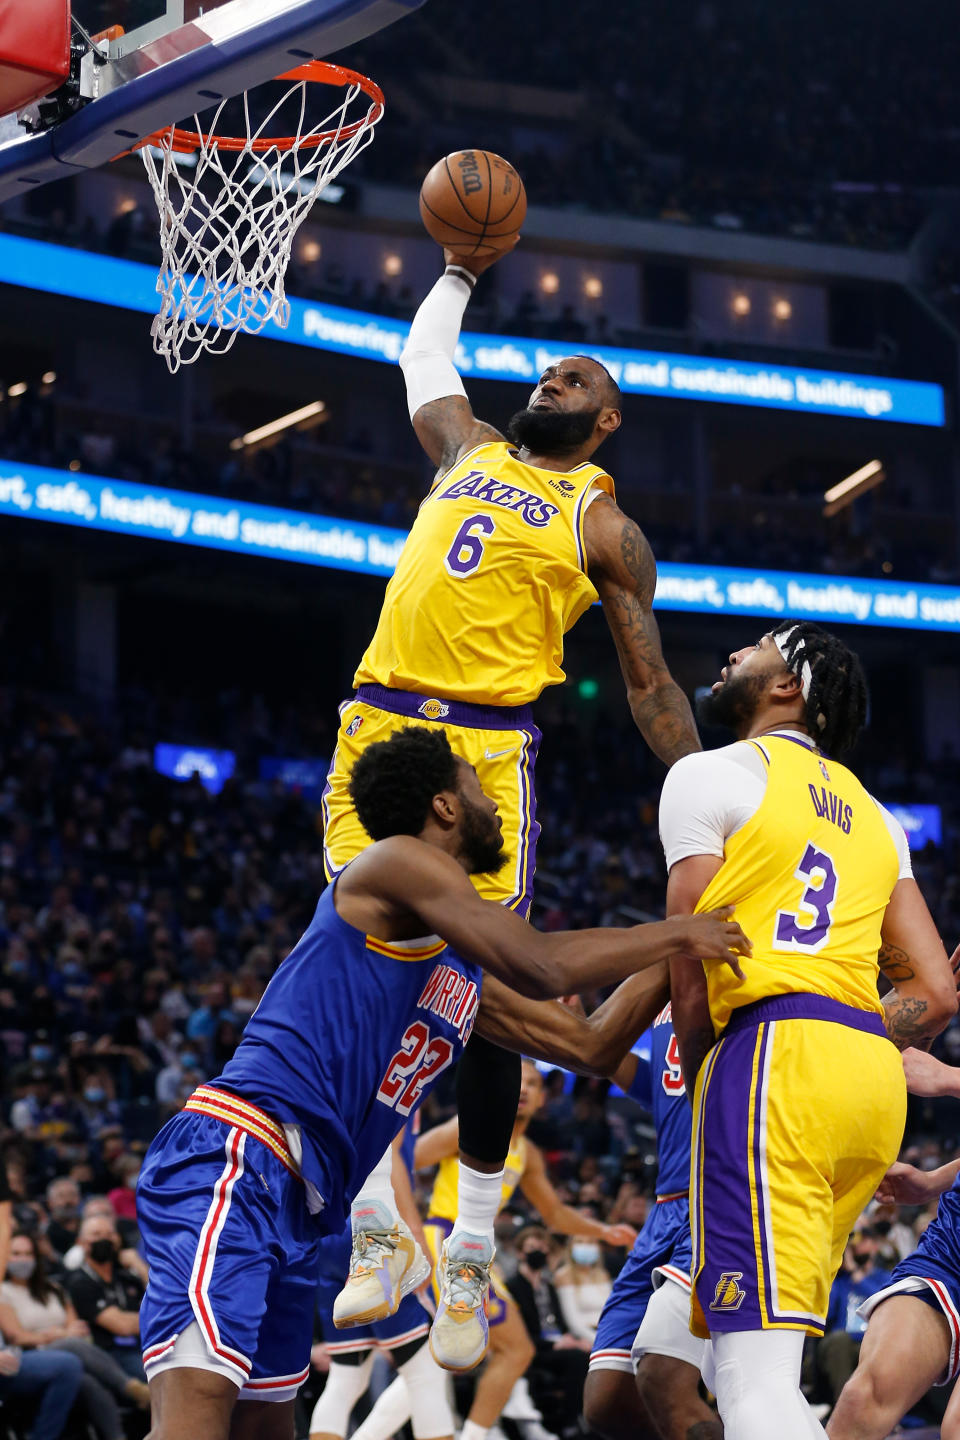 LeBron James #6 of the Los Angeles Lakers dunks the ball in the first half against the Golden State Warriors at Chase Center on February 12, 2022 in San Francisco, California. - Credit: Lachlan Cunningham/Getty Images